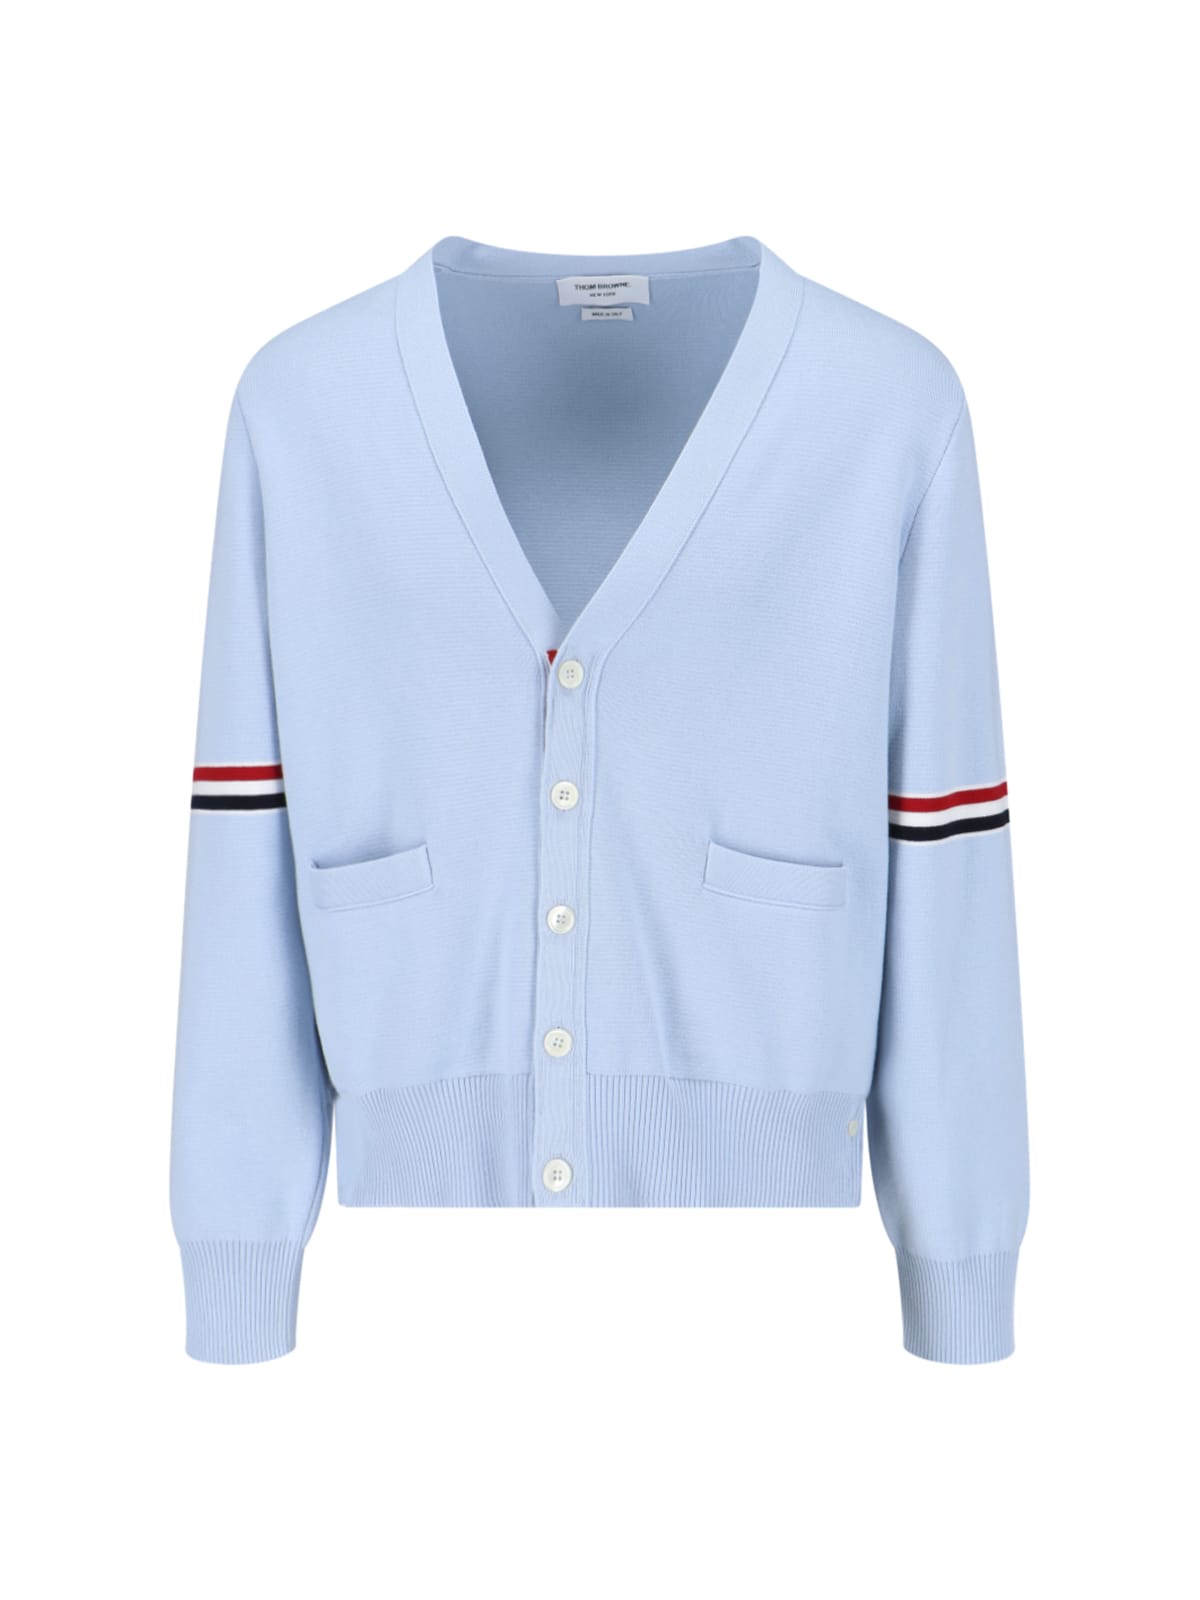 Thom Browne Tricolor Detail Cardigan In Light Blue